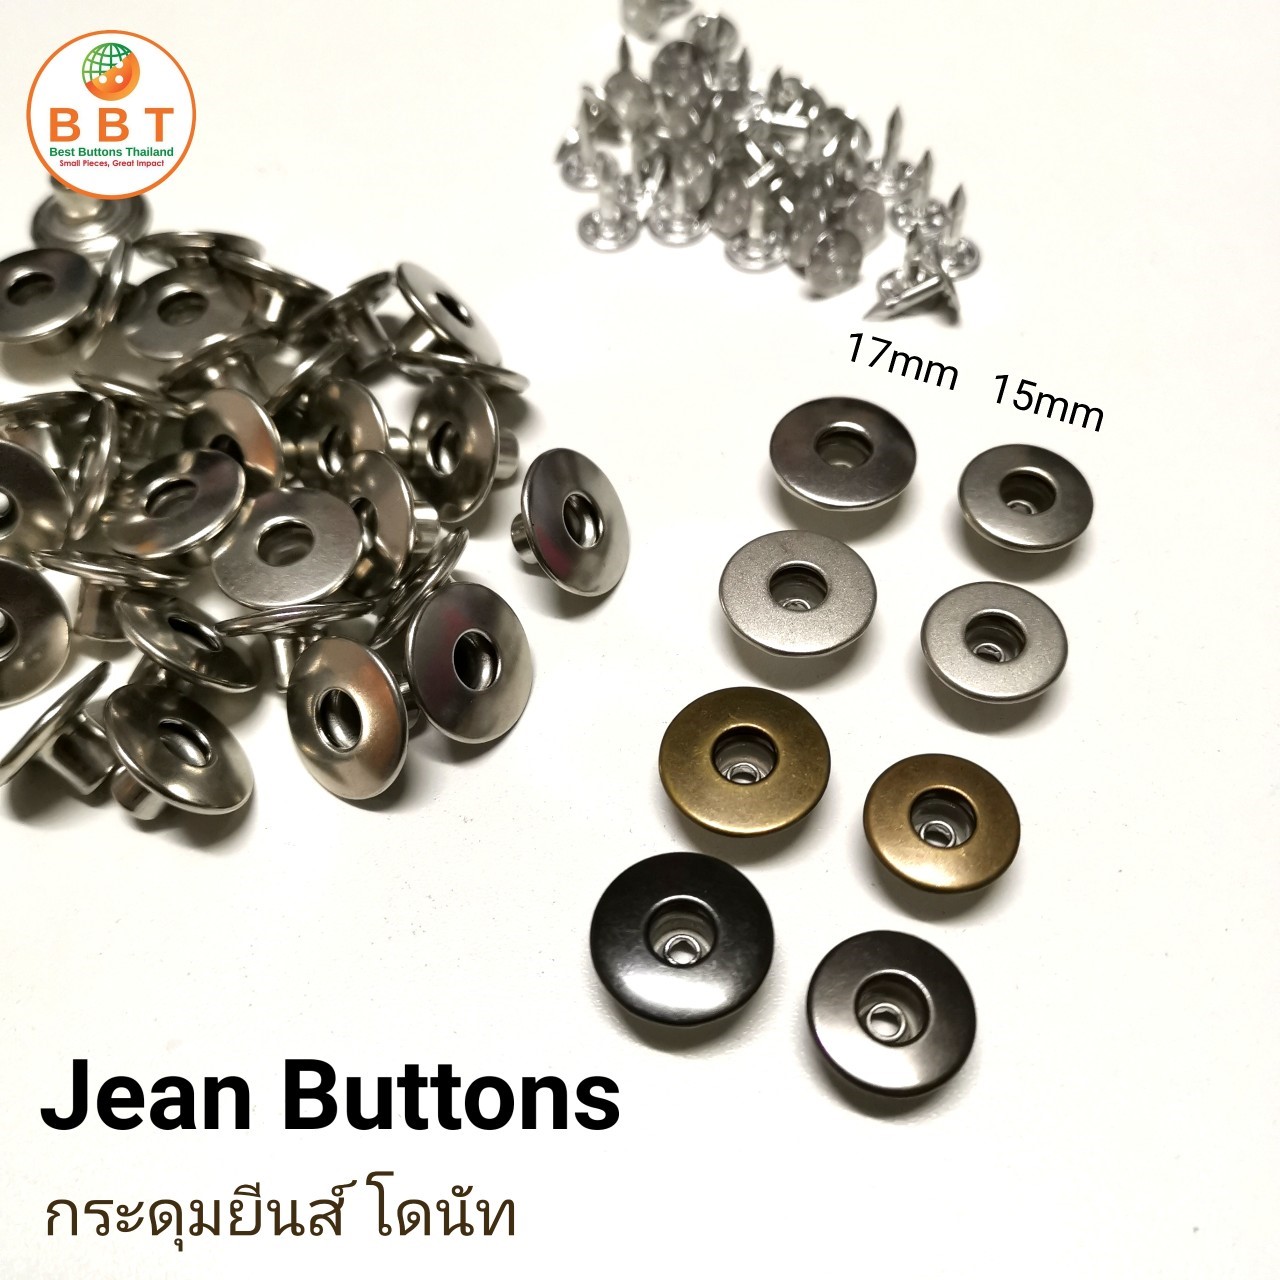 Jean Buttons 17 mm